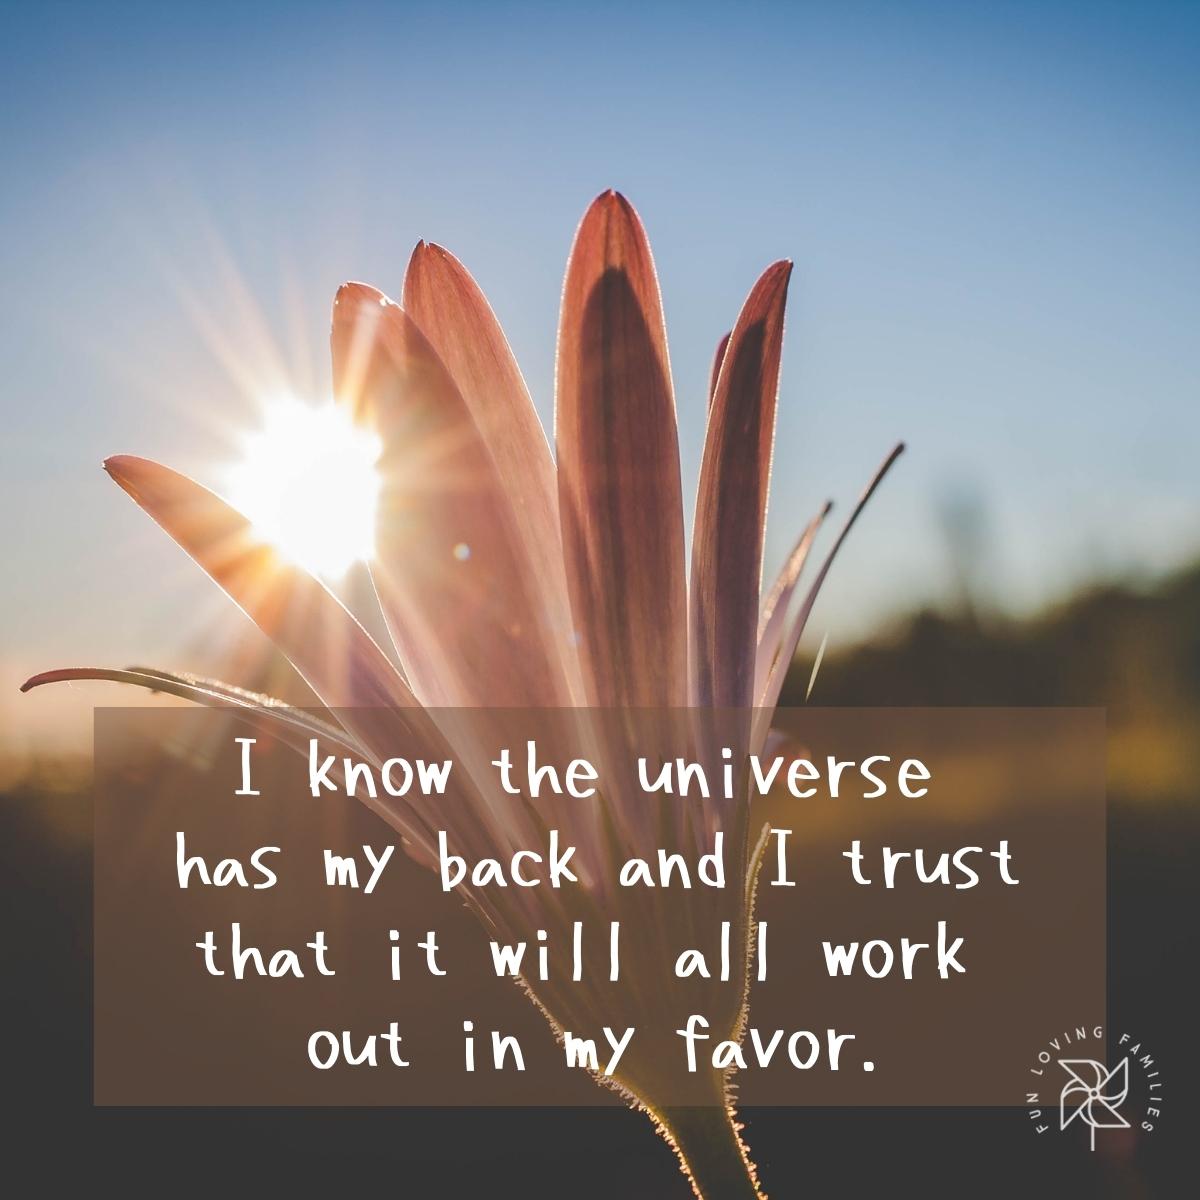 I know the universe has my back and I trust that it will all work out in my favor affirmation